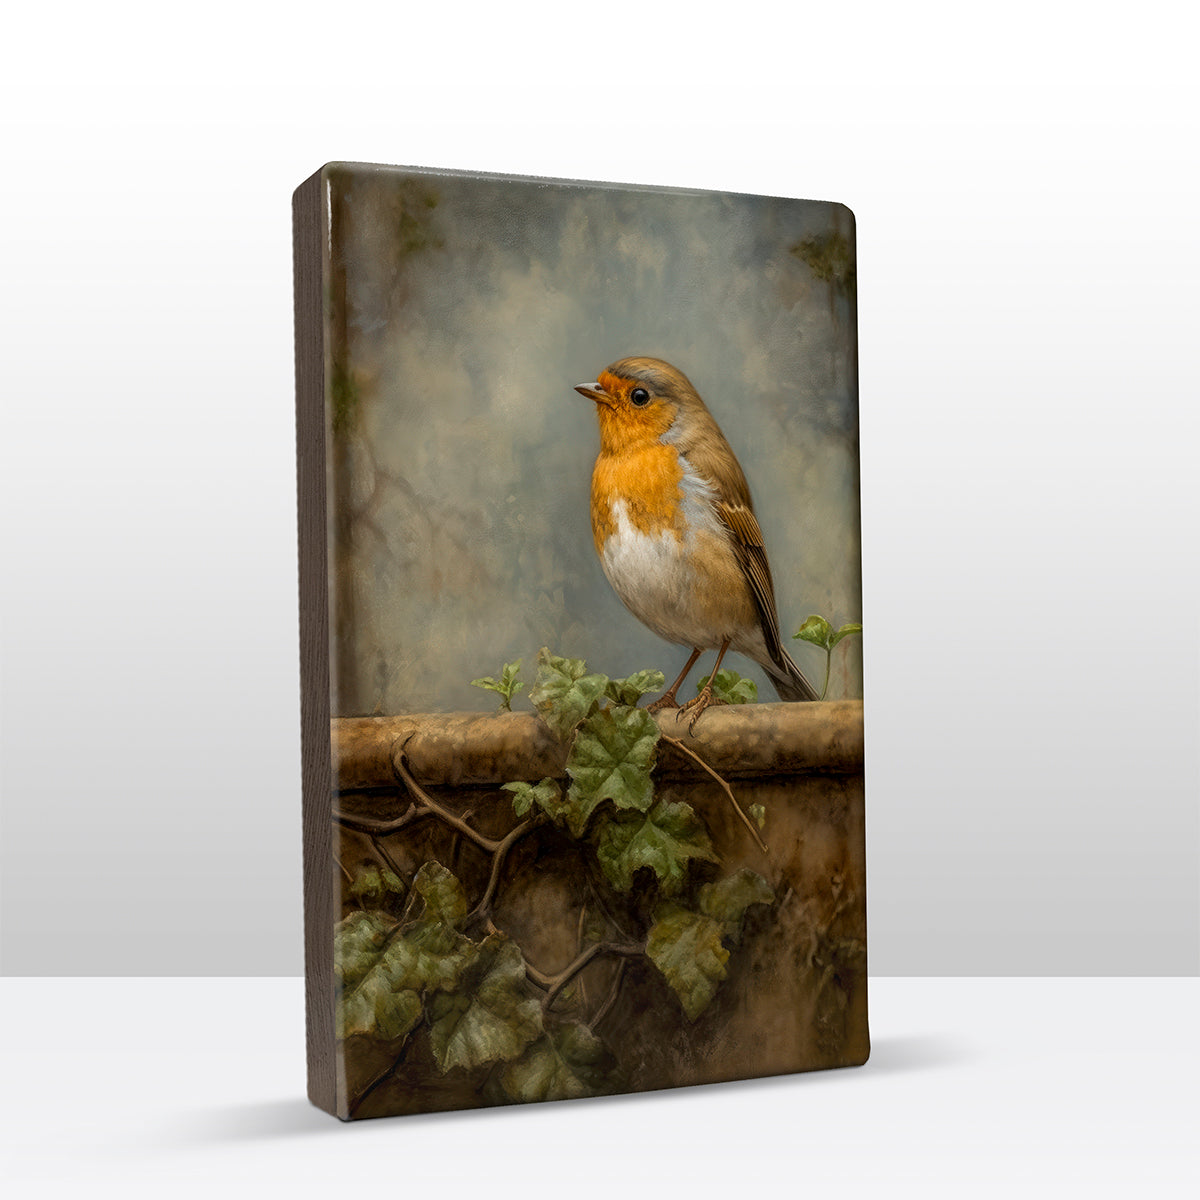 Laque print - Robin on wall - Hand lacquered - 19.5 x 30 cm - LP375